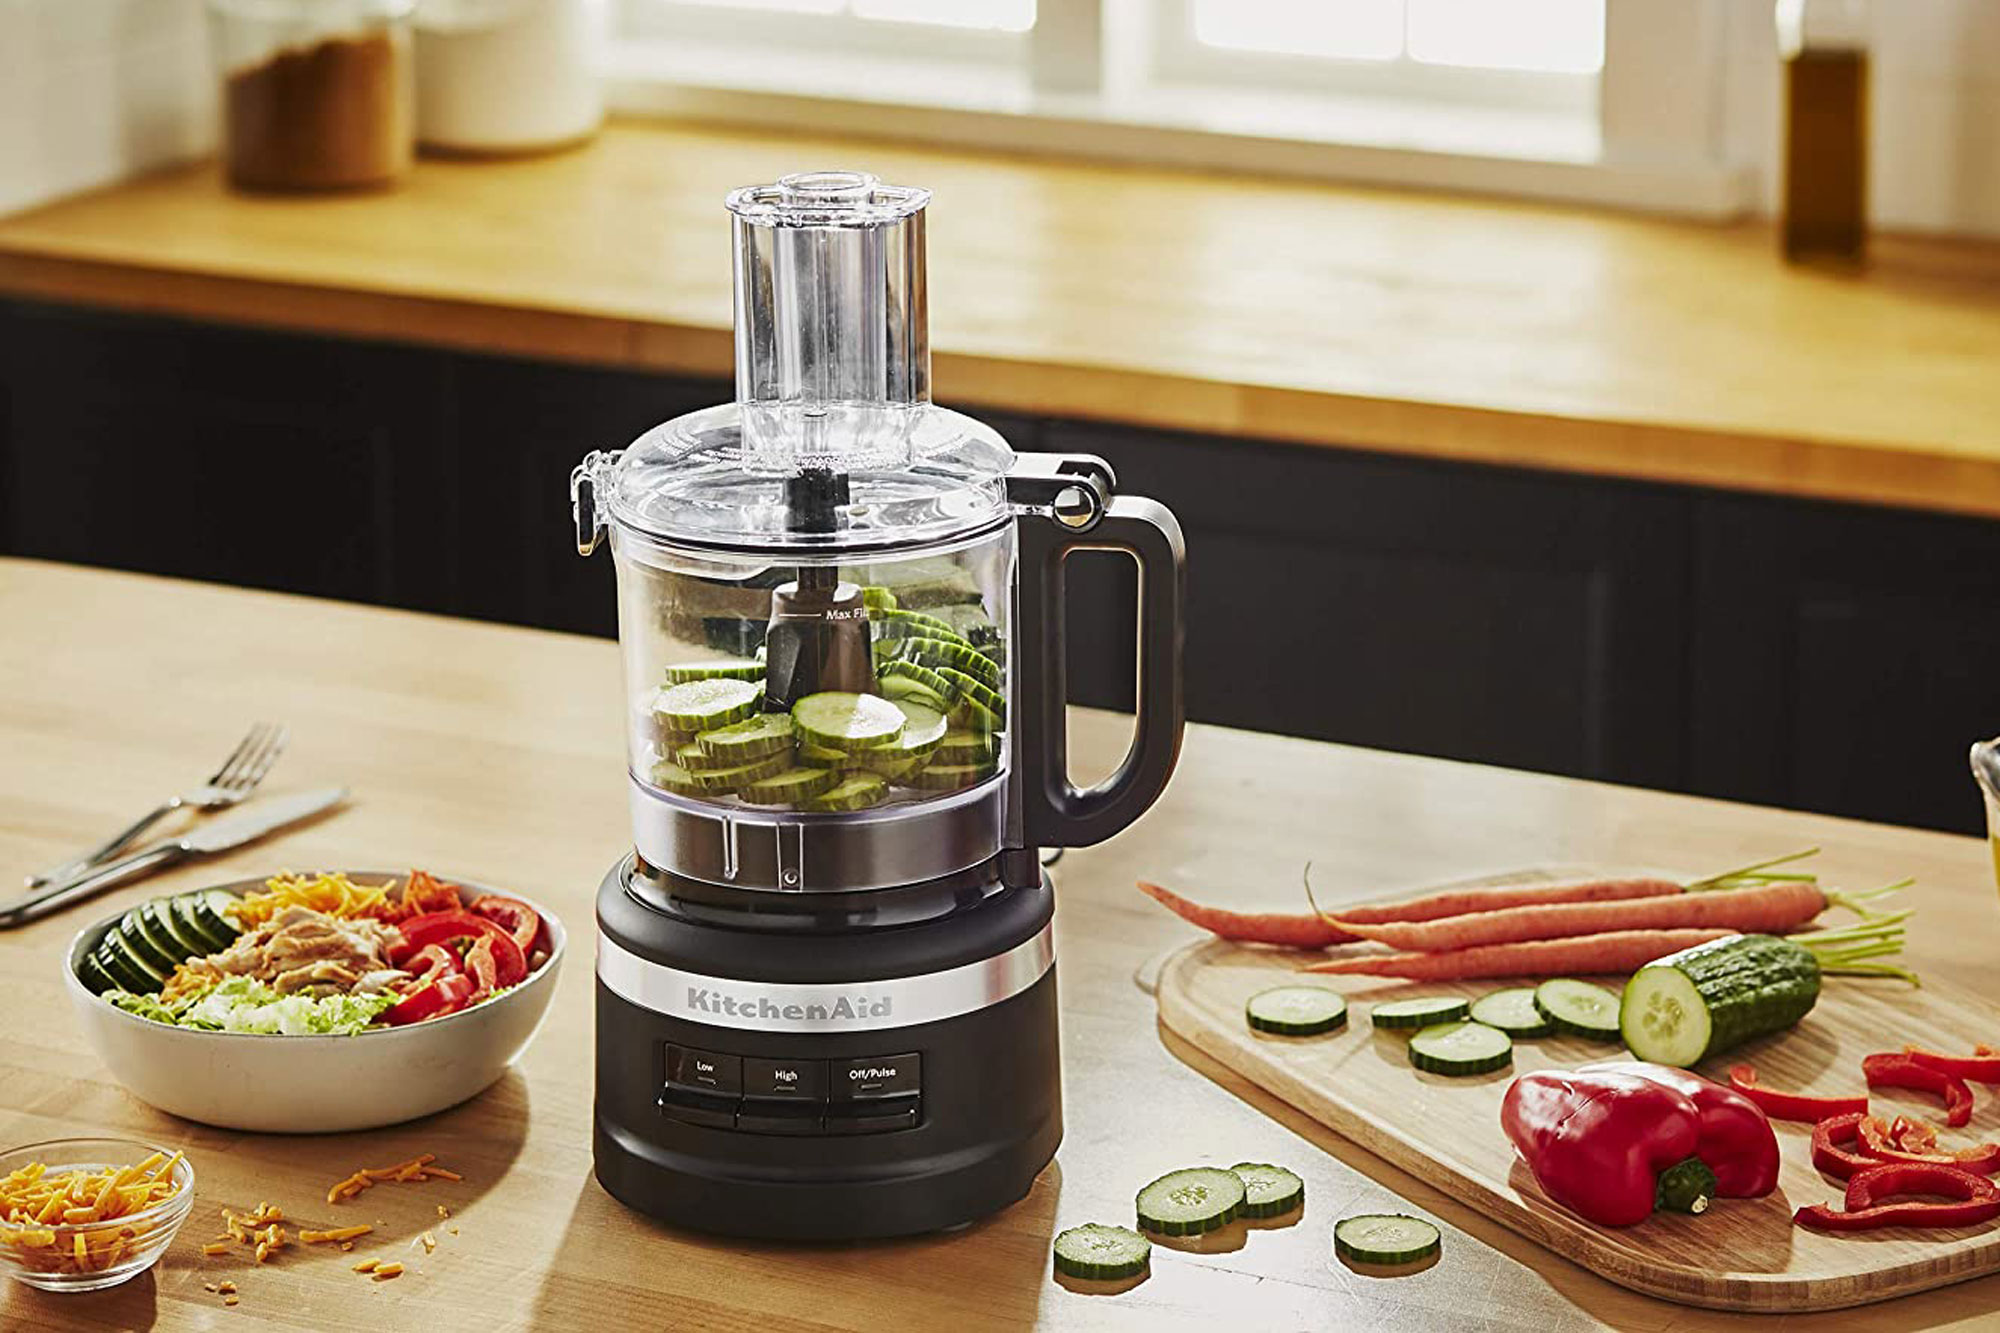 Top 08 food processors for 2021, including Breville, Cuisinart, and more